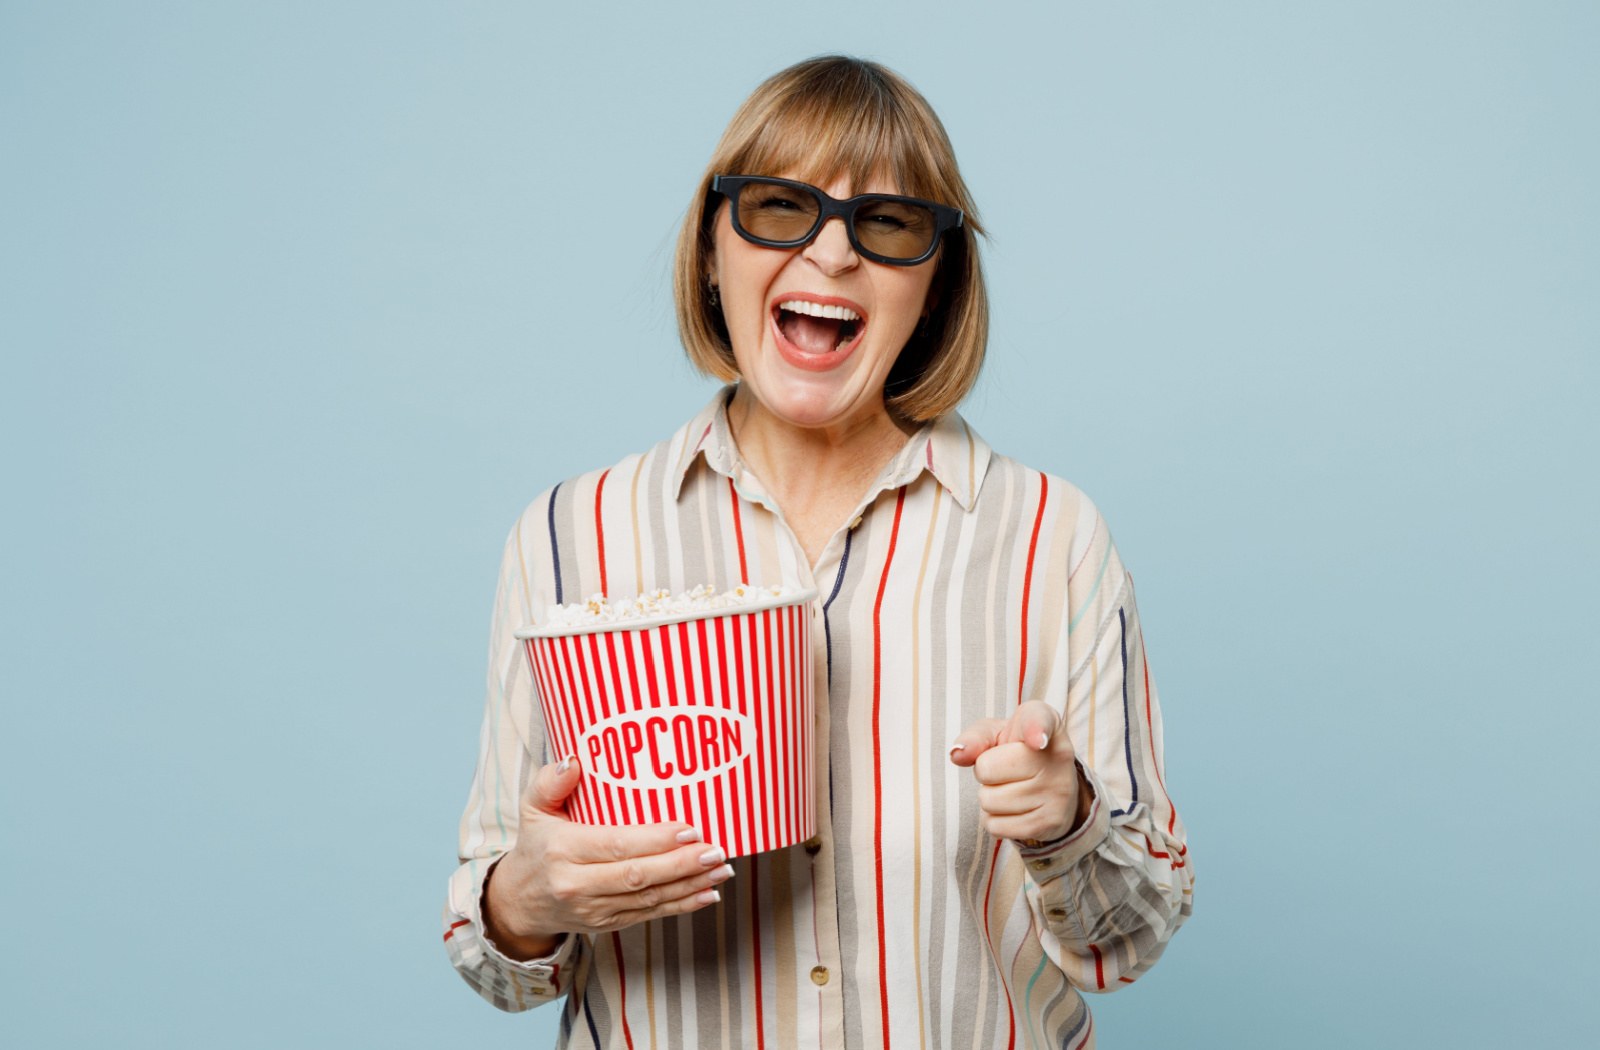 Senior woman in a striped shirt holding a bucket of popcorn laughing and pointing towards the camera.